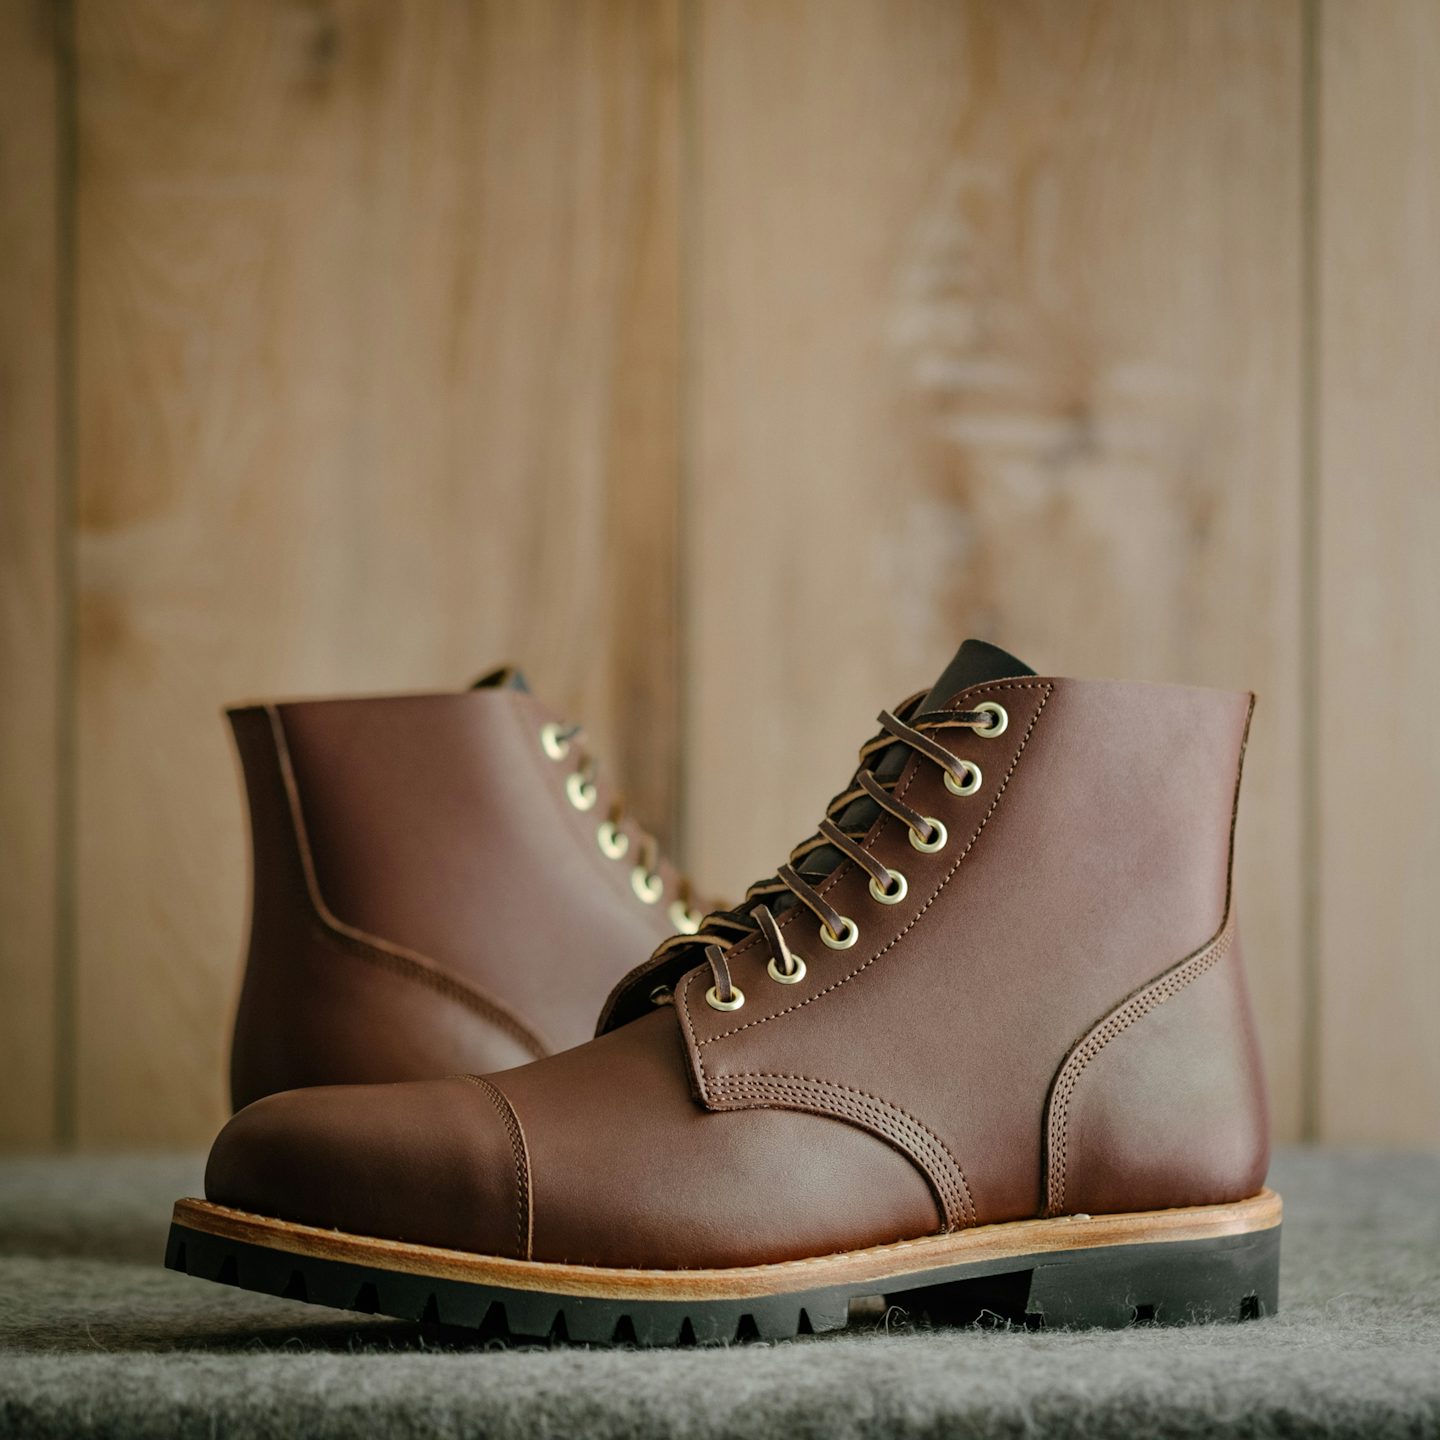 Chestnut Logger Cap-Toe Field Boot - Detail Image One